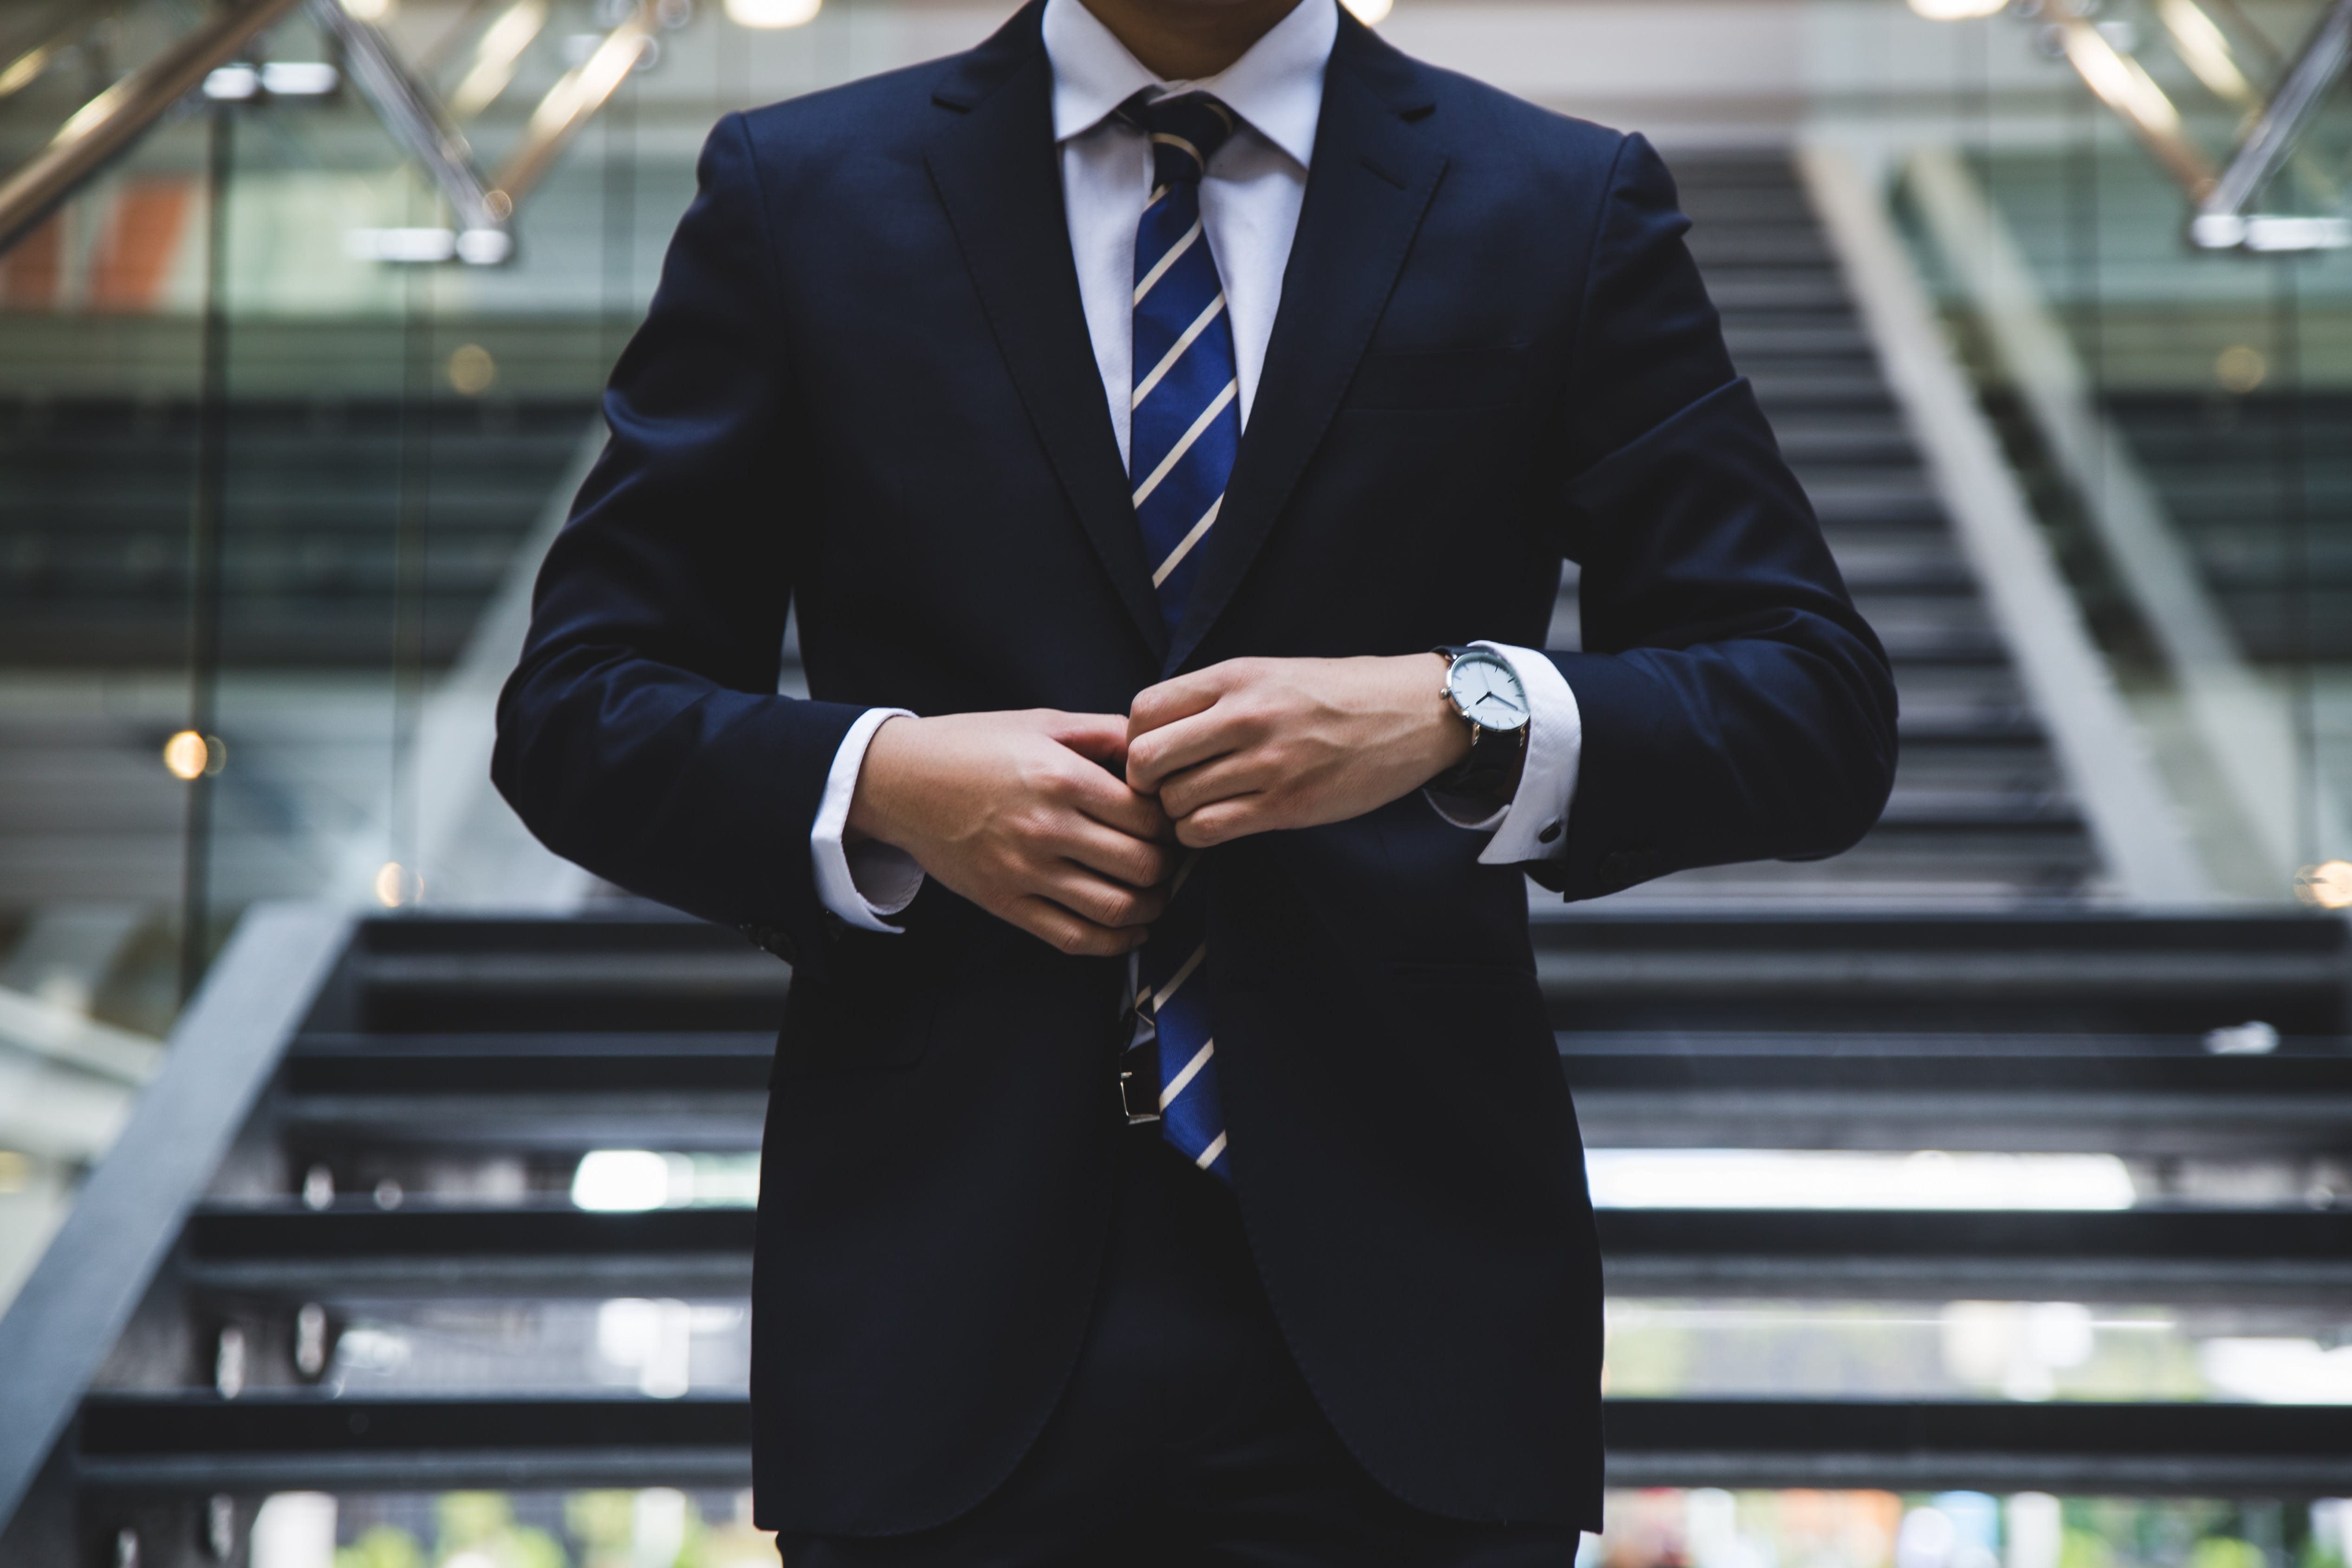 Man in navy blue suit buttoning jacket while standing in front of stairs; image by Hunters Race, via Unsplash.com.